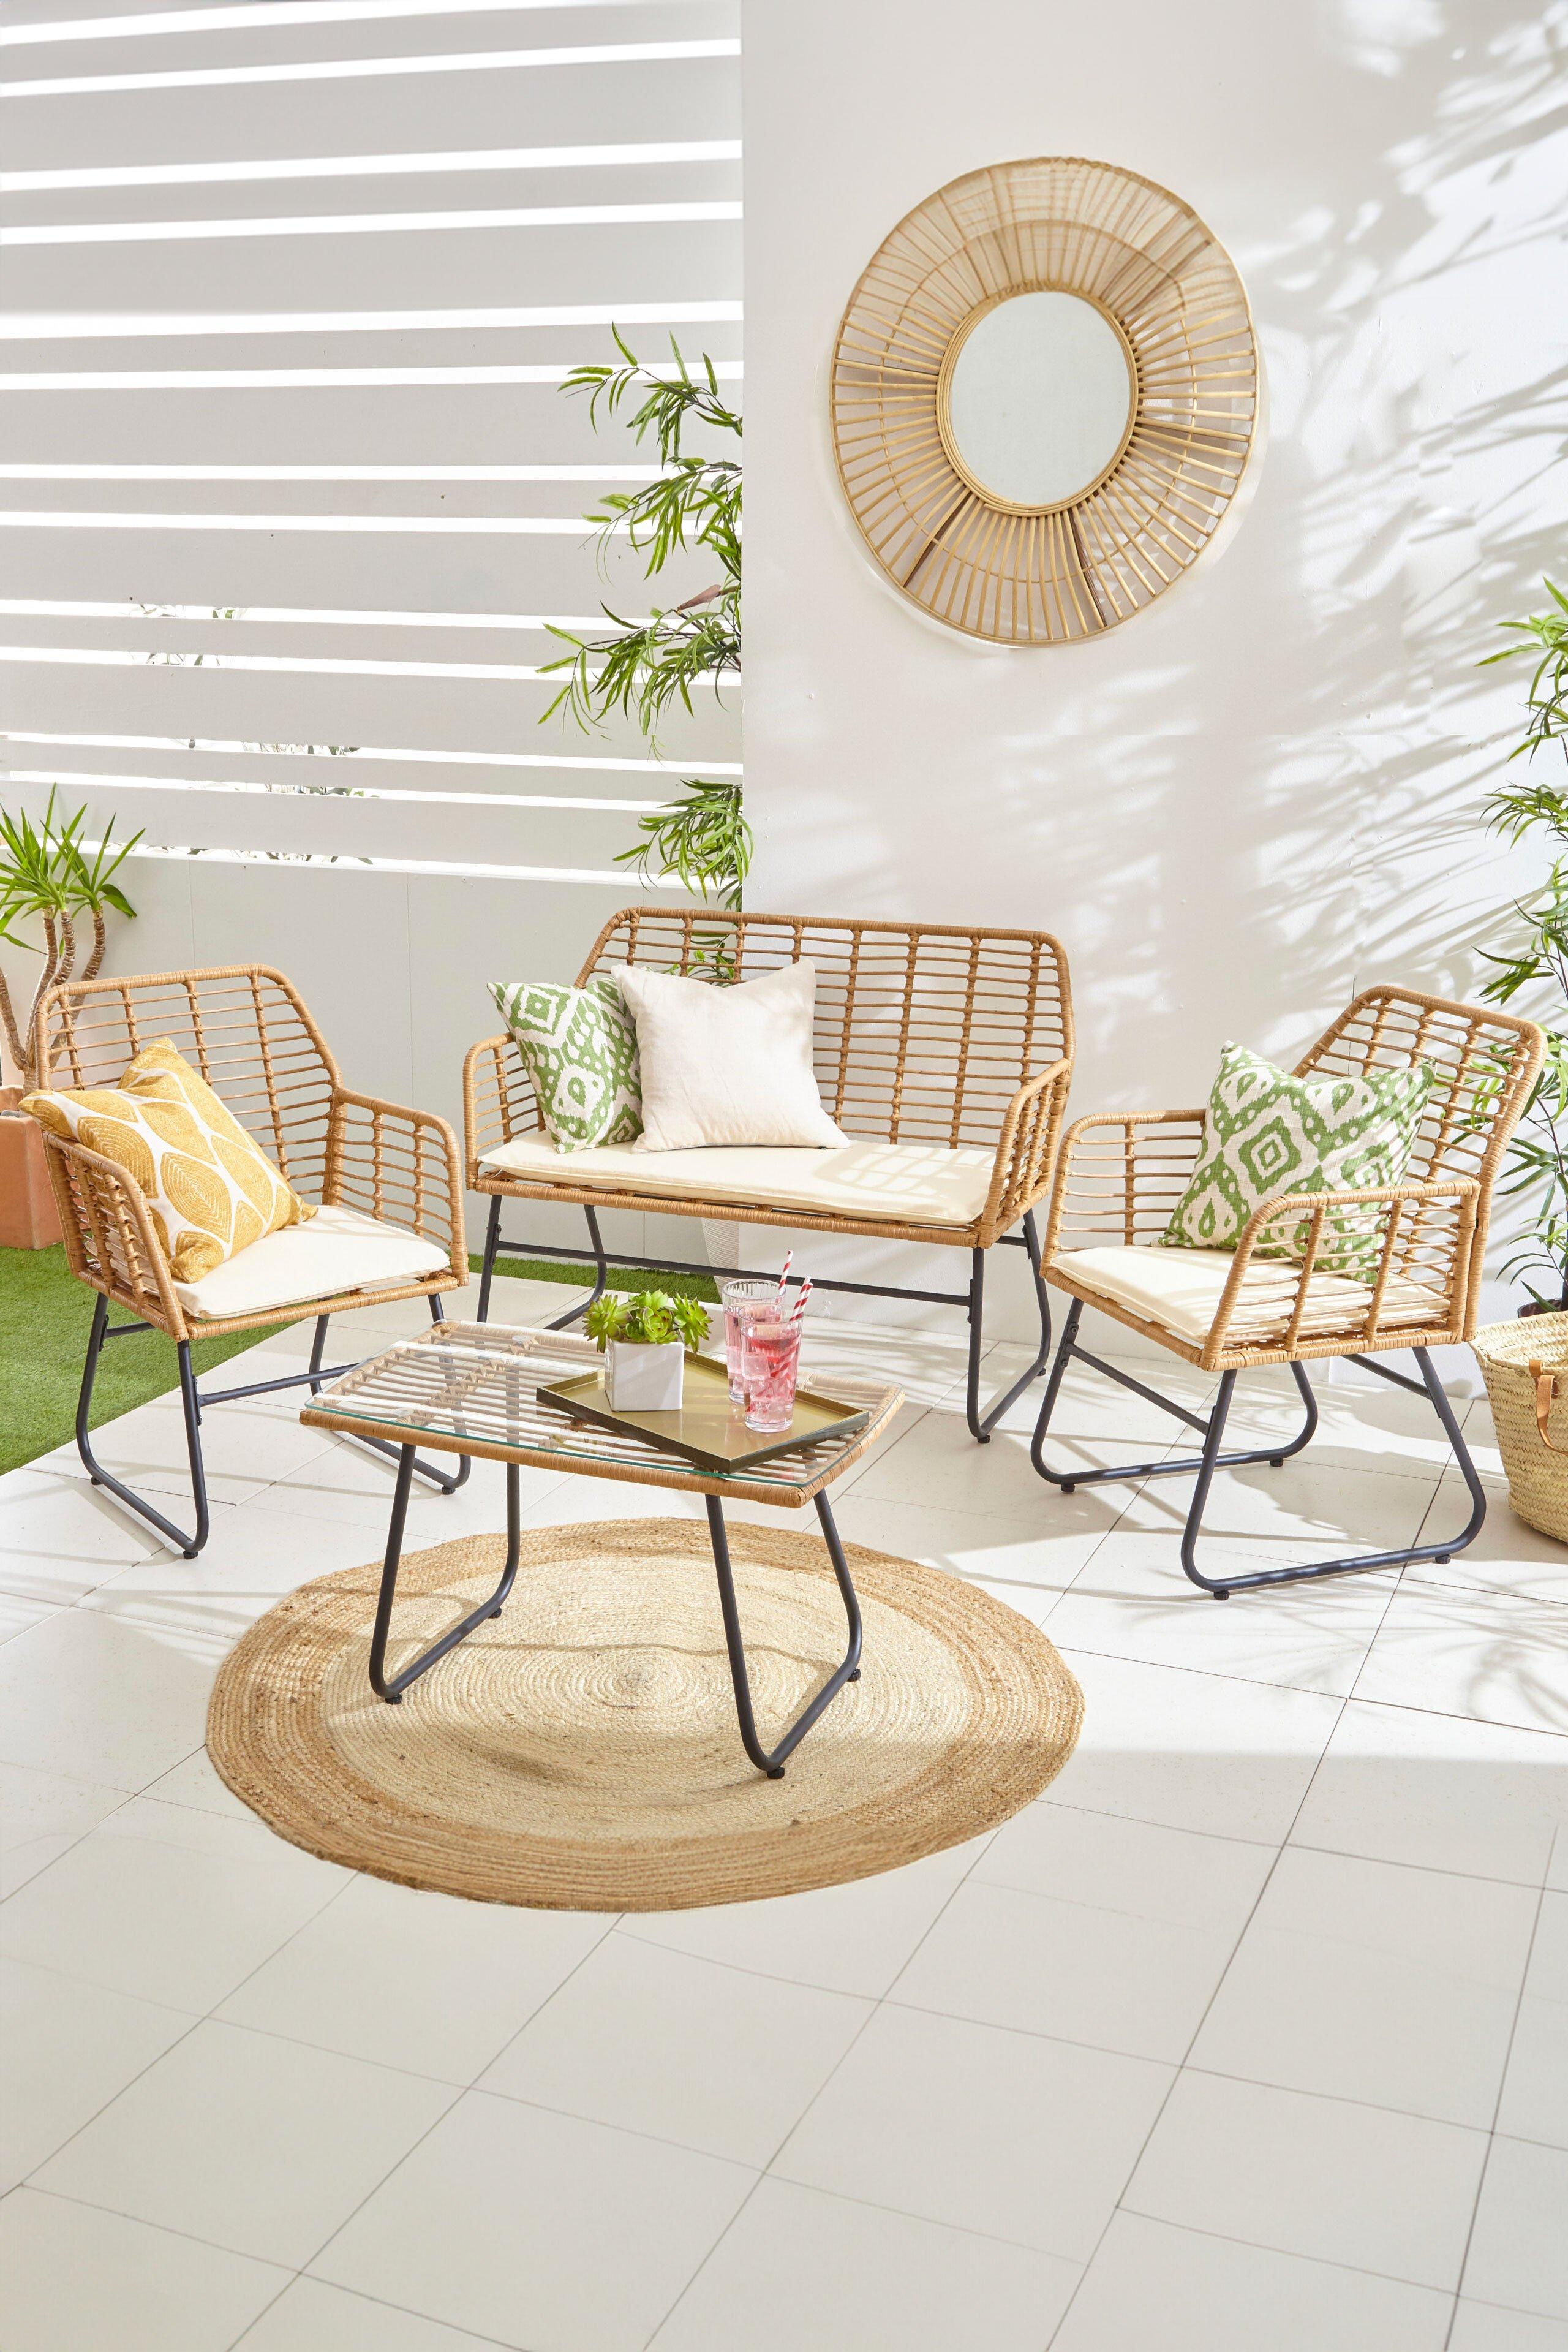 4 Piece Wicker Bamboo Style Garden Sofa, Table & Chairs Set